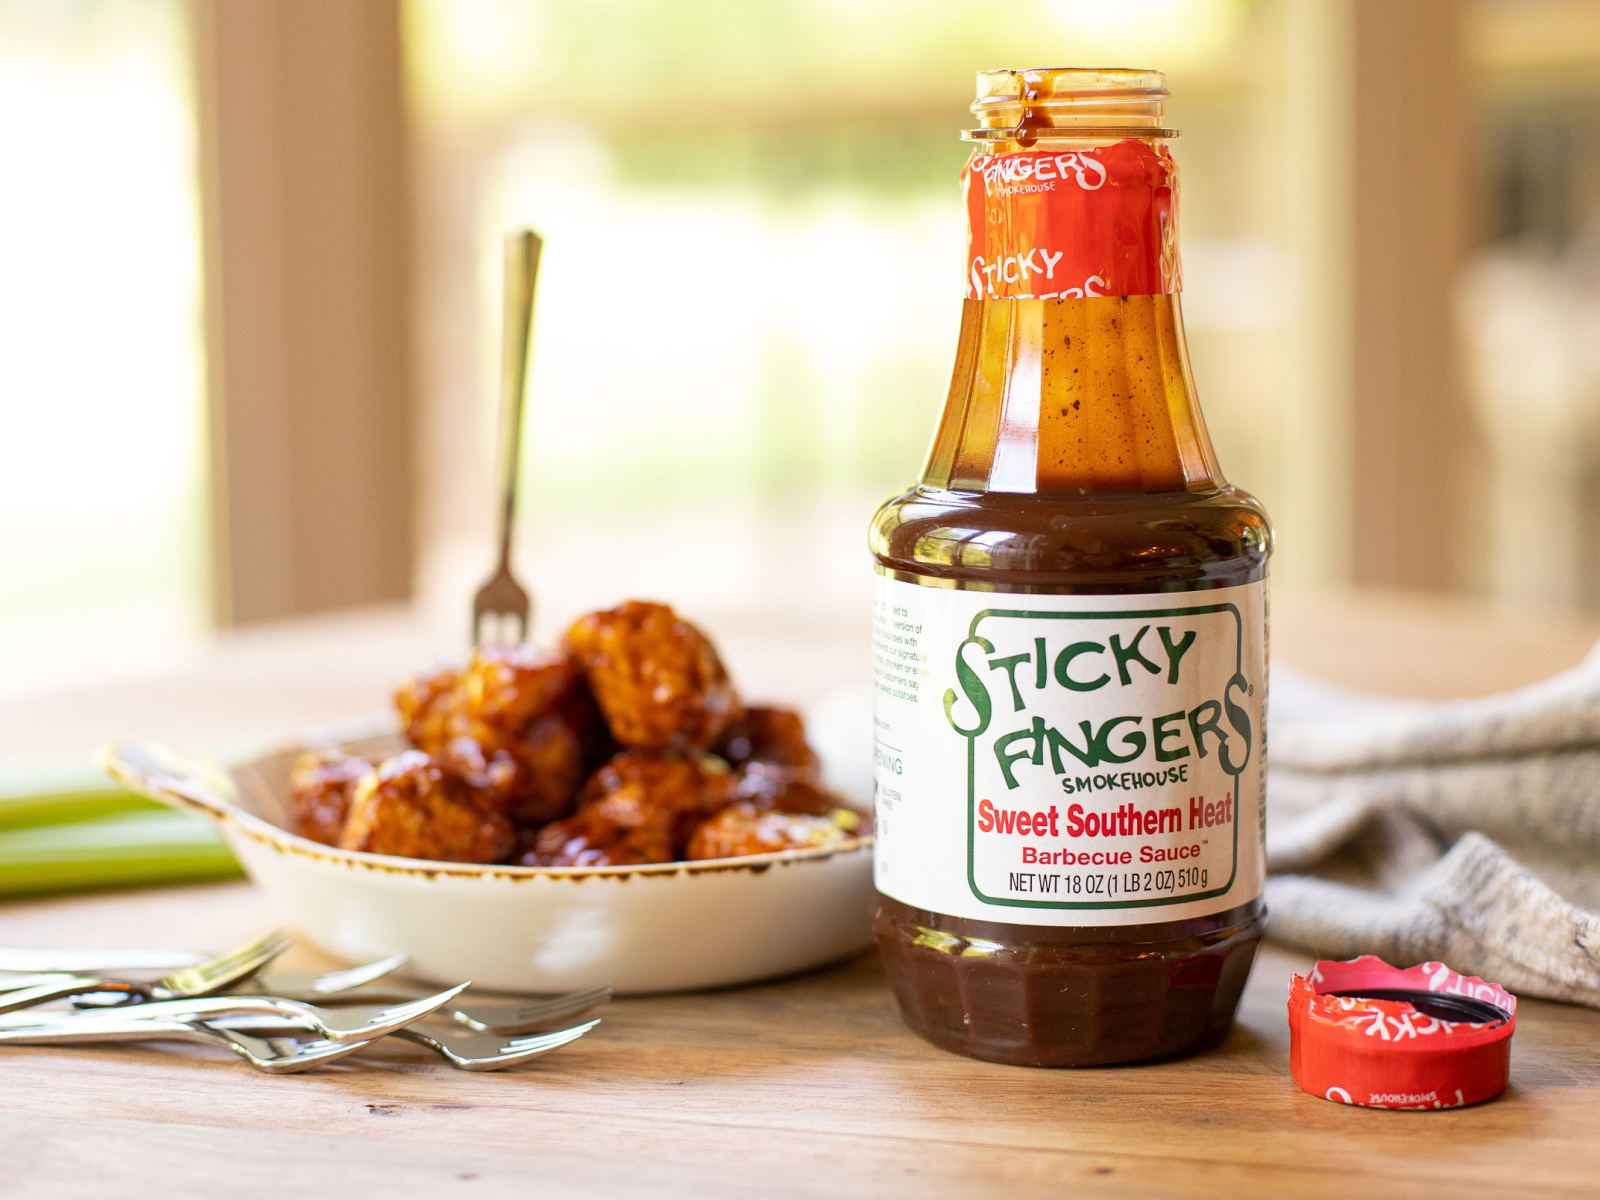 Sticky Fingers Smokehouse Barbecue Sauce Only 60¢ At Publix